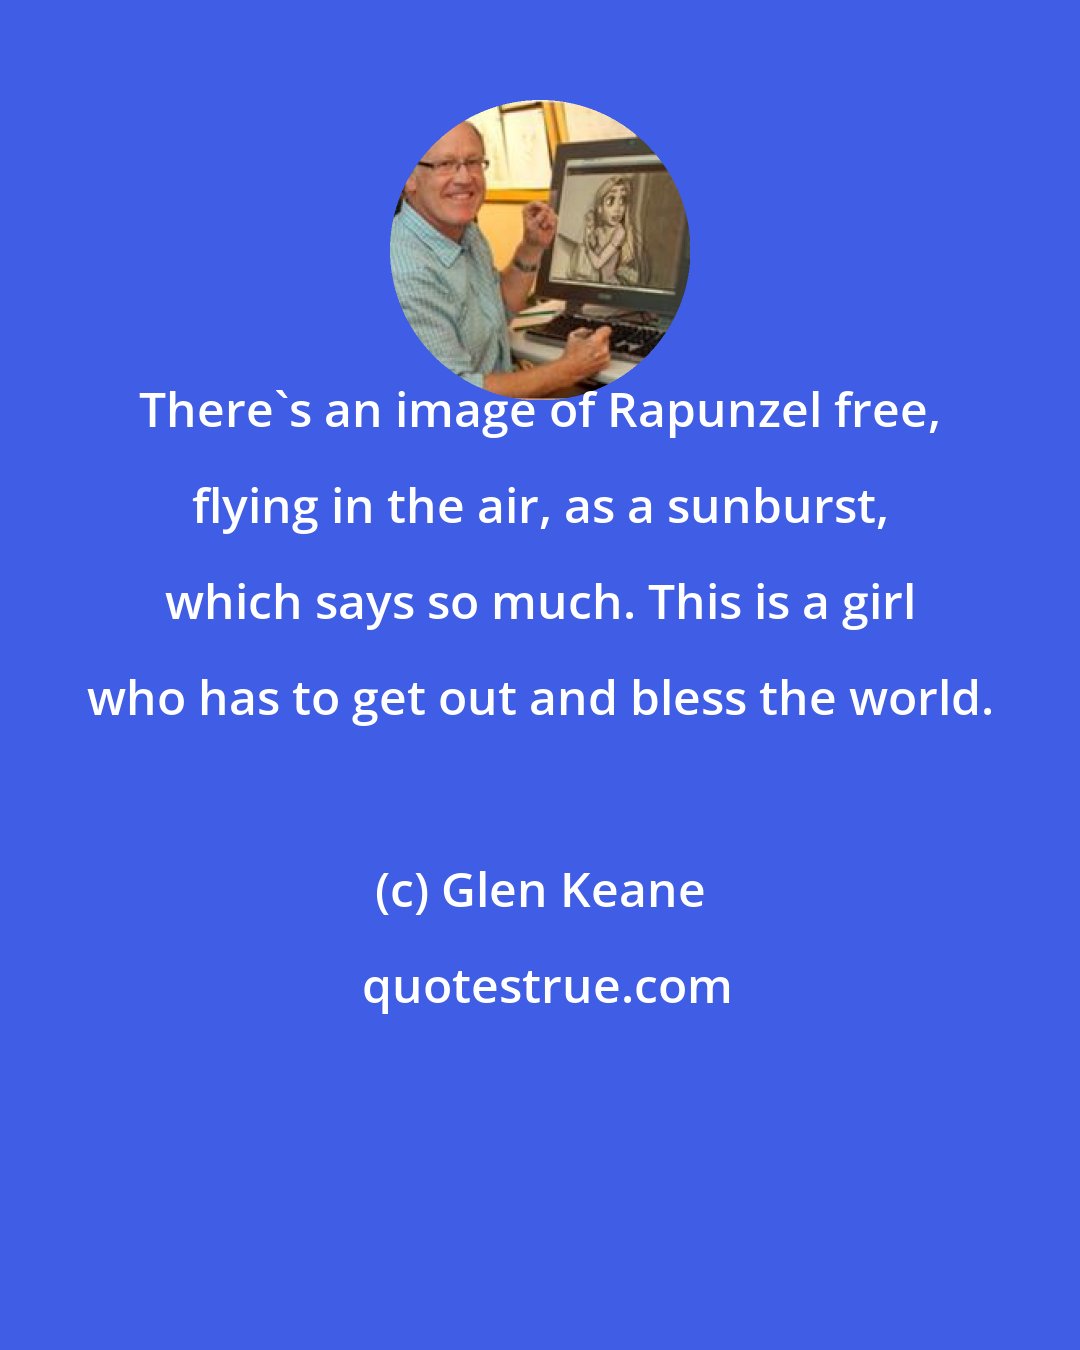 Glen Keane: There's an image of Rapunzel free, flying in the air, as a sunburst, which says so much. This is a girl who has to get out and bless the world.